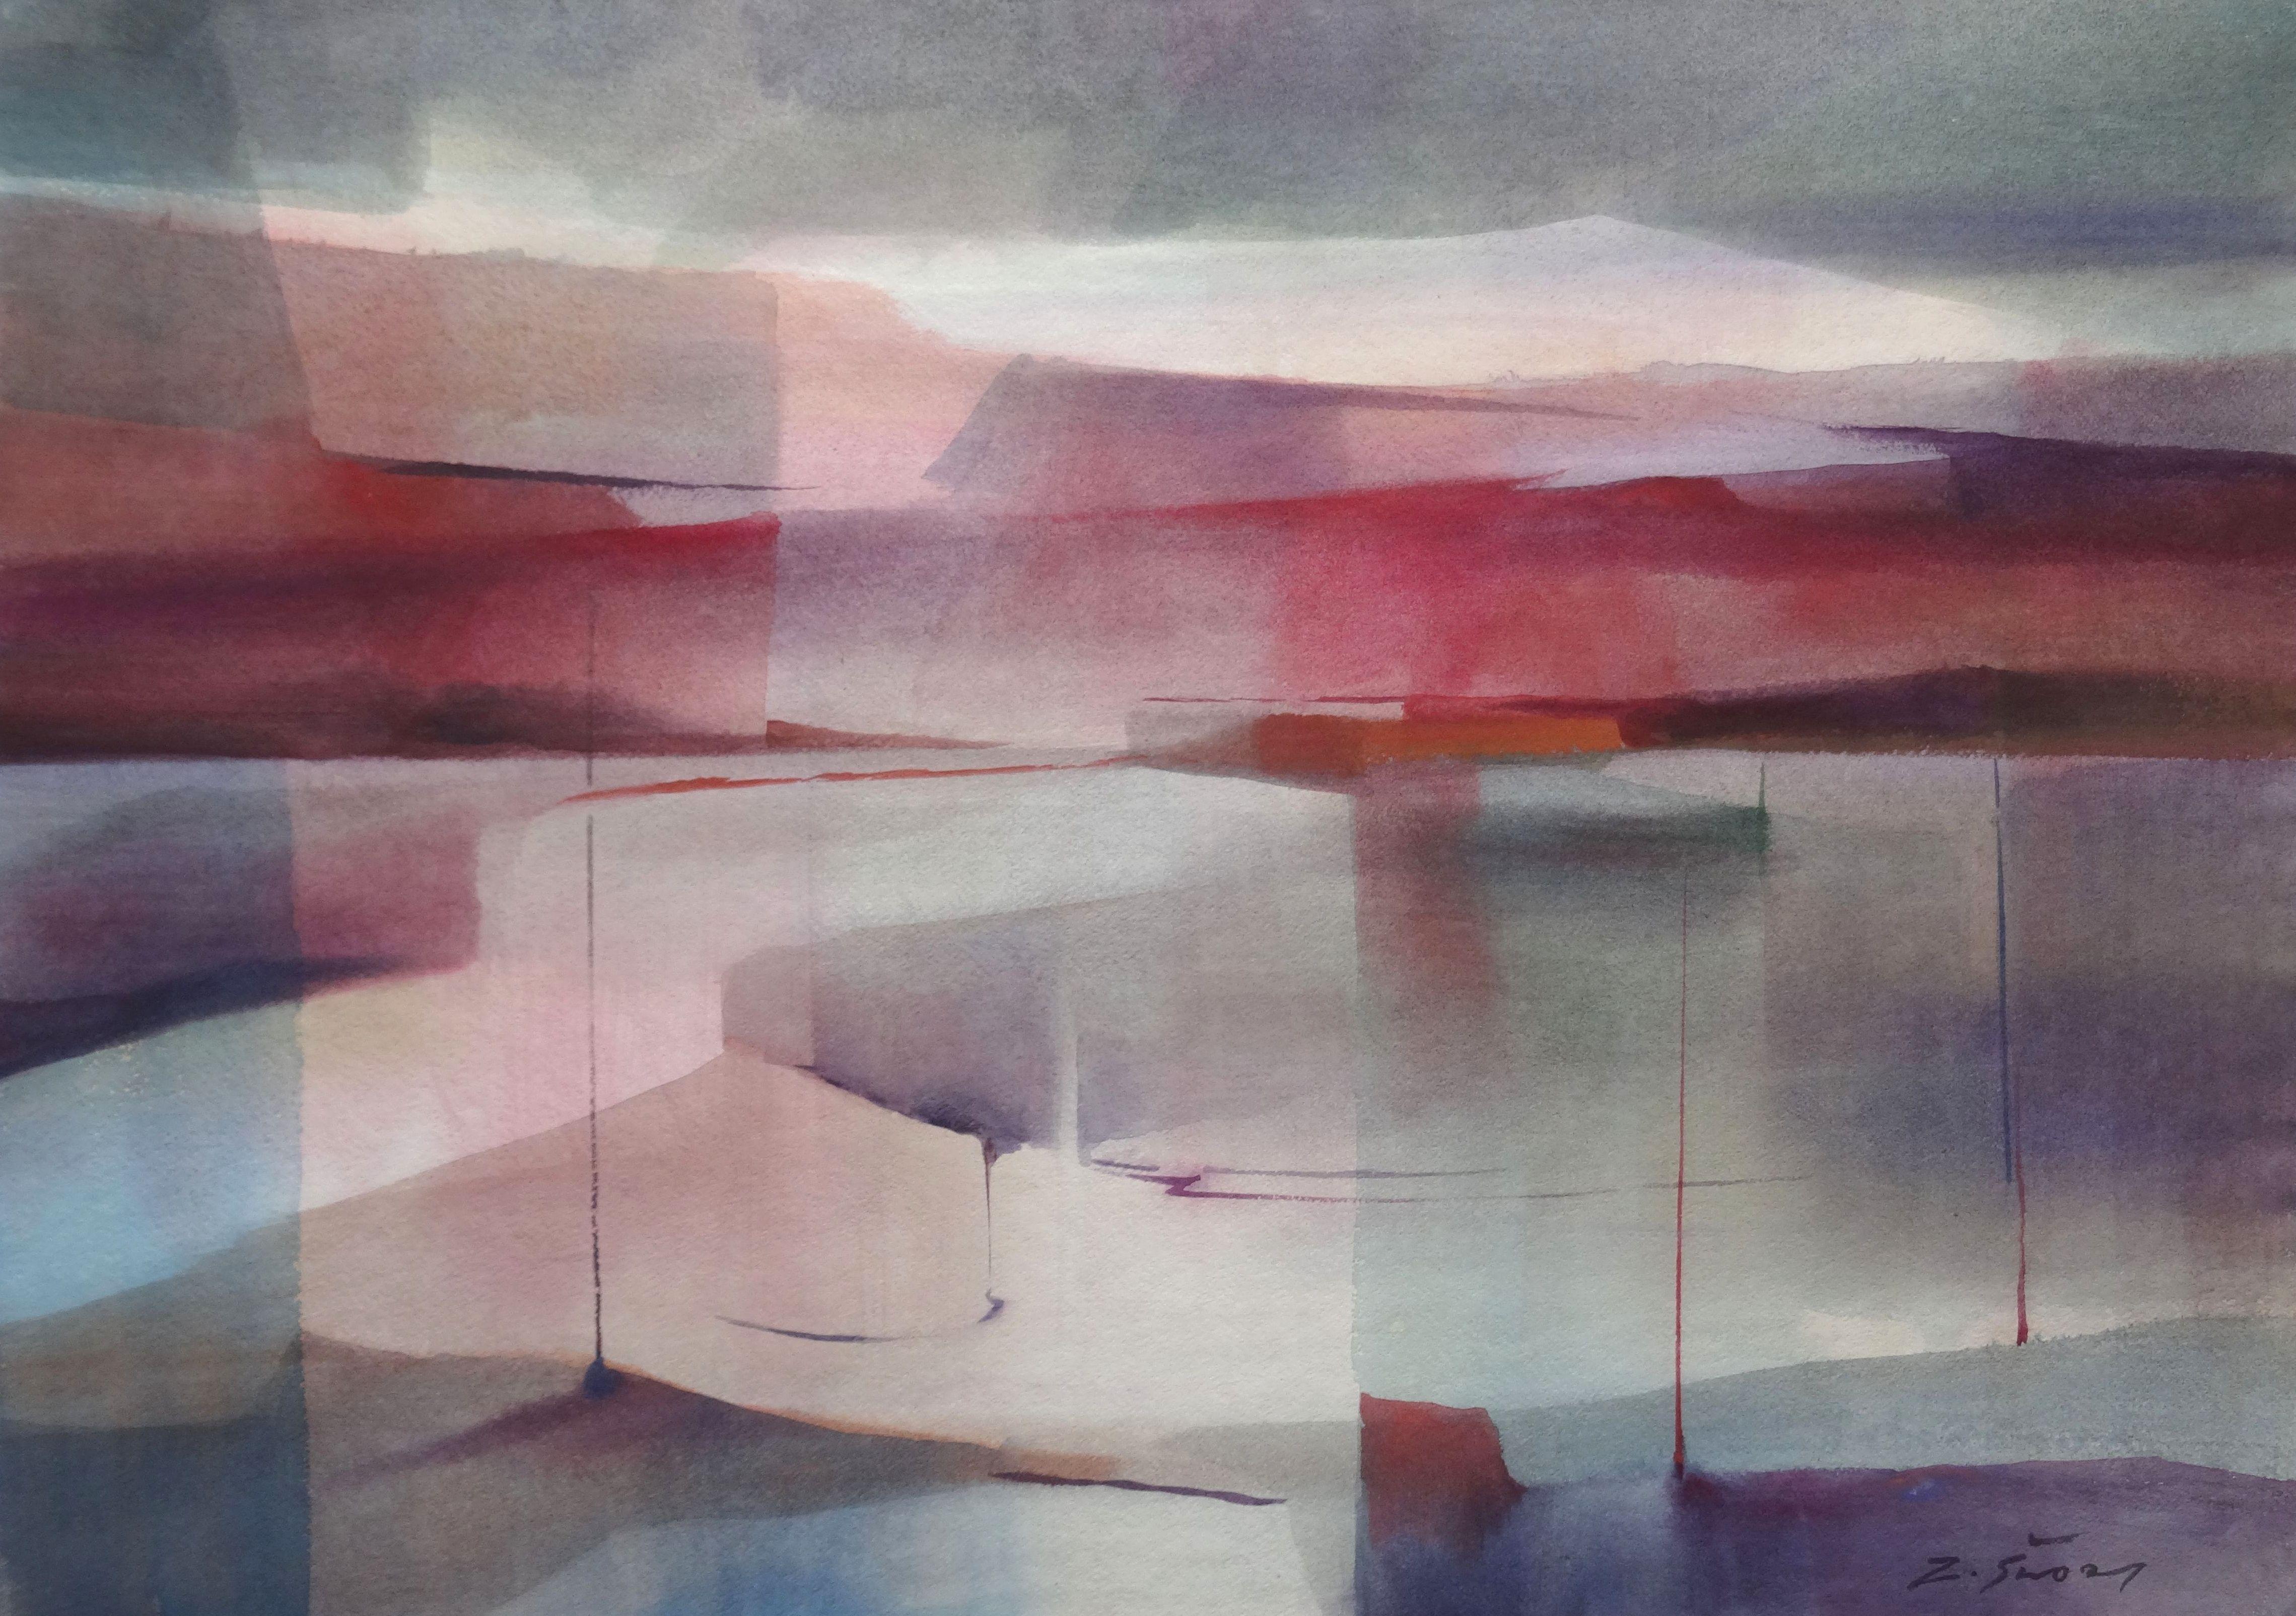 Zigmunds Snore  Abstract Painting - Mood. 2020. Watercolor, paper, 60, 5 x 85, 5 cm